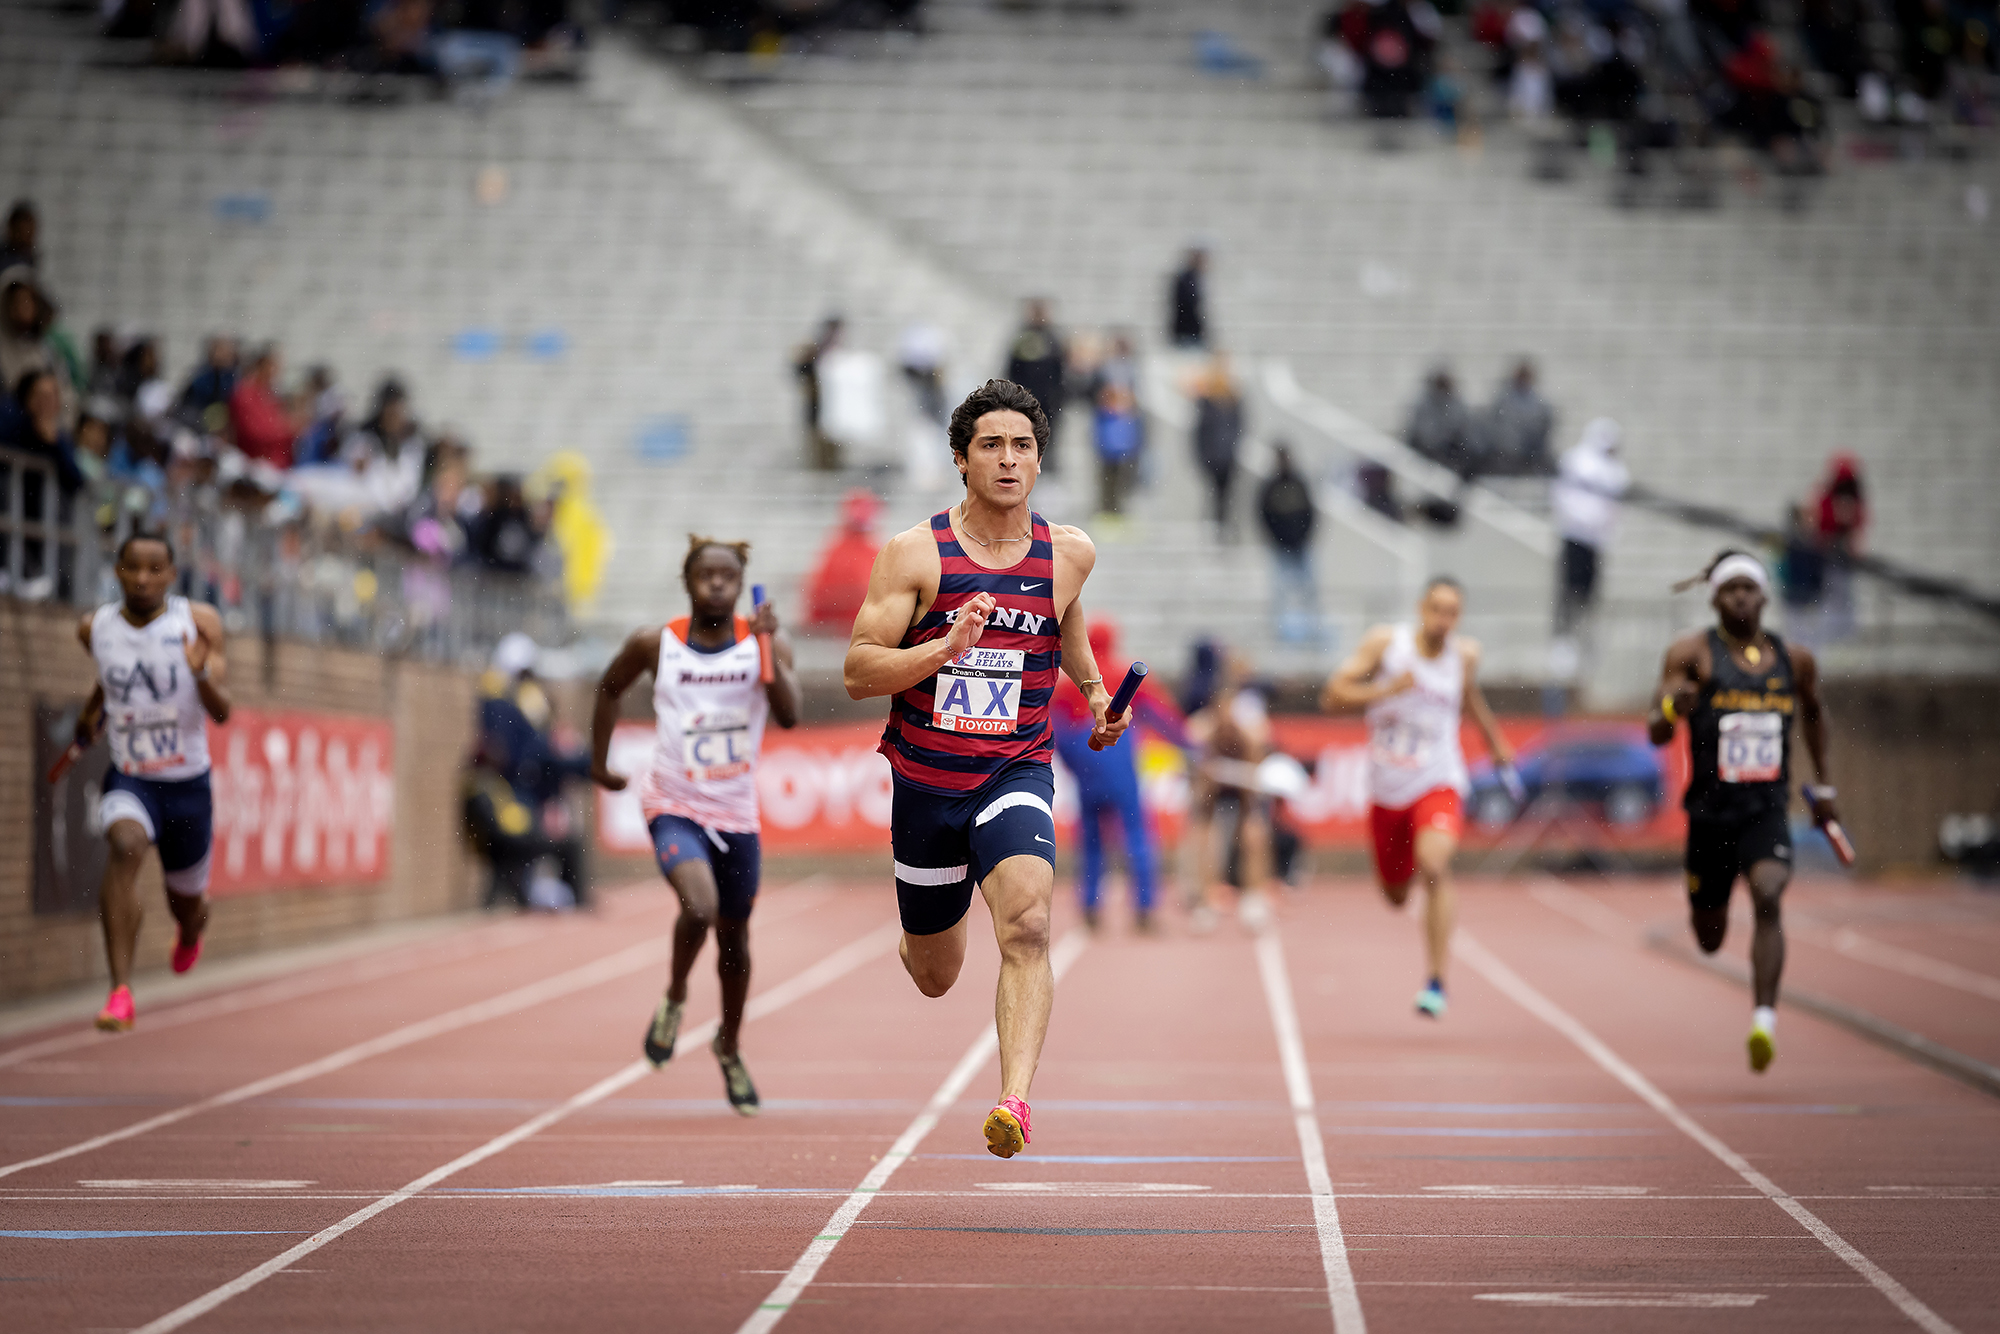 Aaron Stillitano, a second-year sprinter from Middletown, New Jersey, runs in the Penn Relays. Stillitano, first-year John Ruvo IV, second-year Holden Emery, and first-year Liam Going placed 10th in the College Men’s Sprint Medley Championship of America on Friday with a time of 3:34.98.